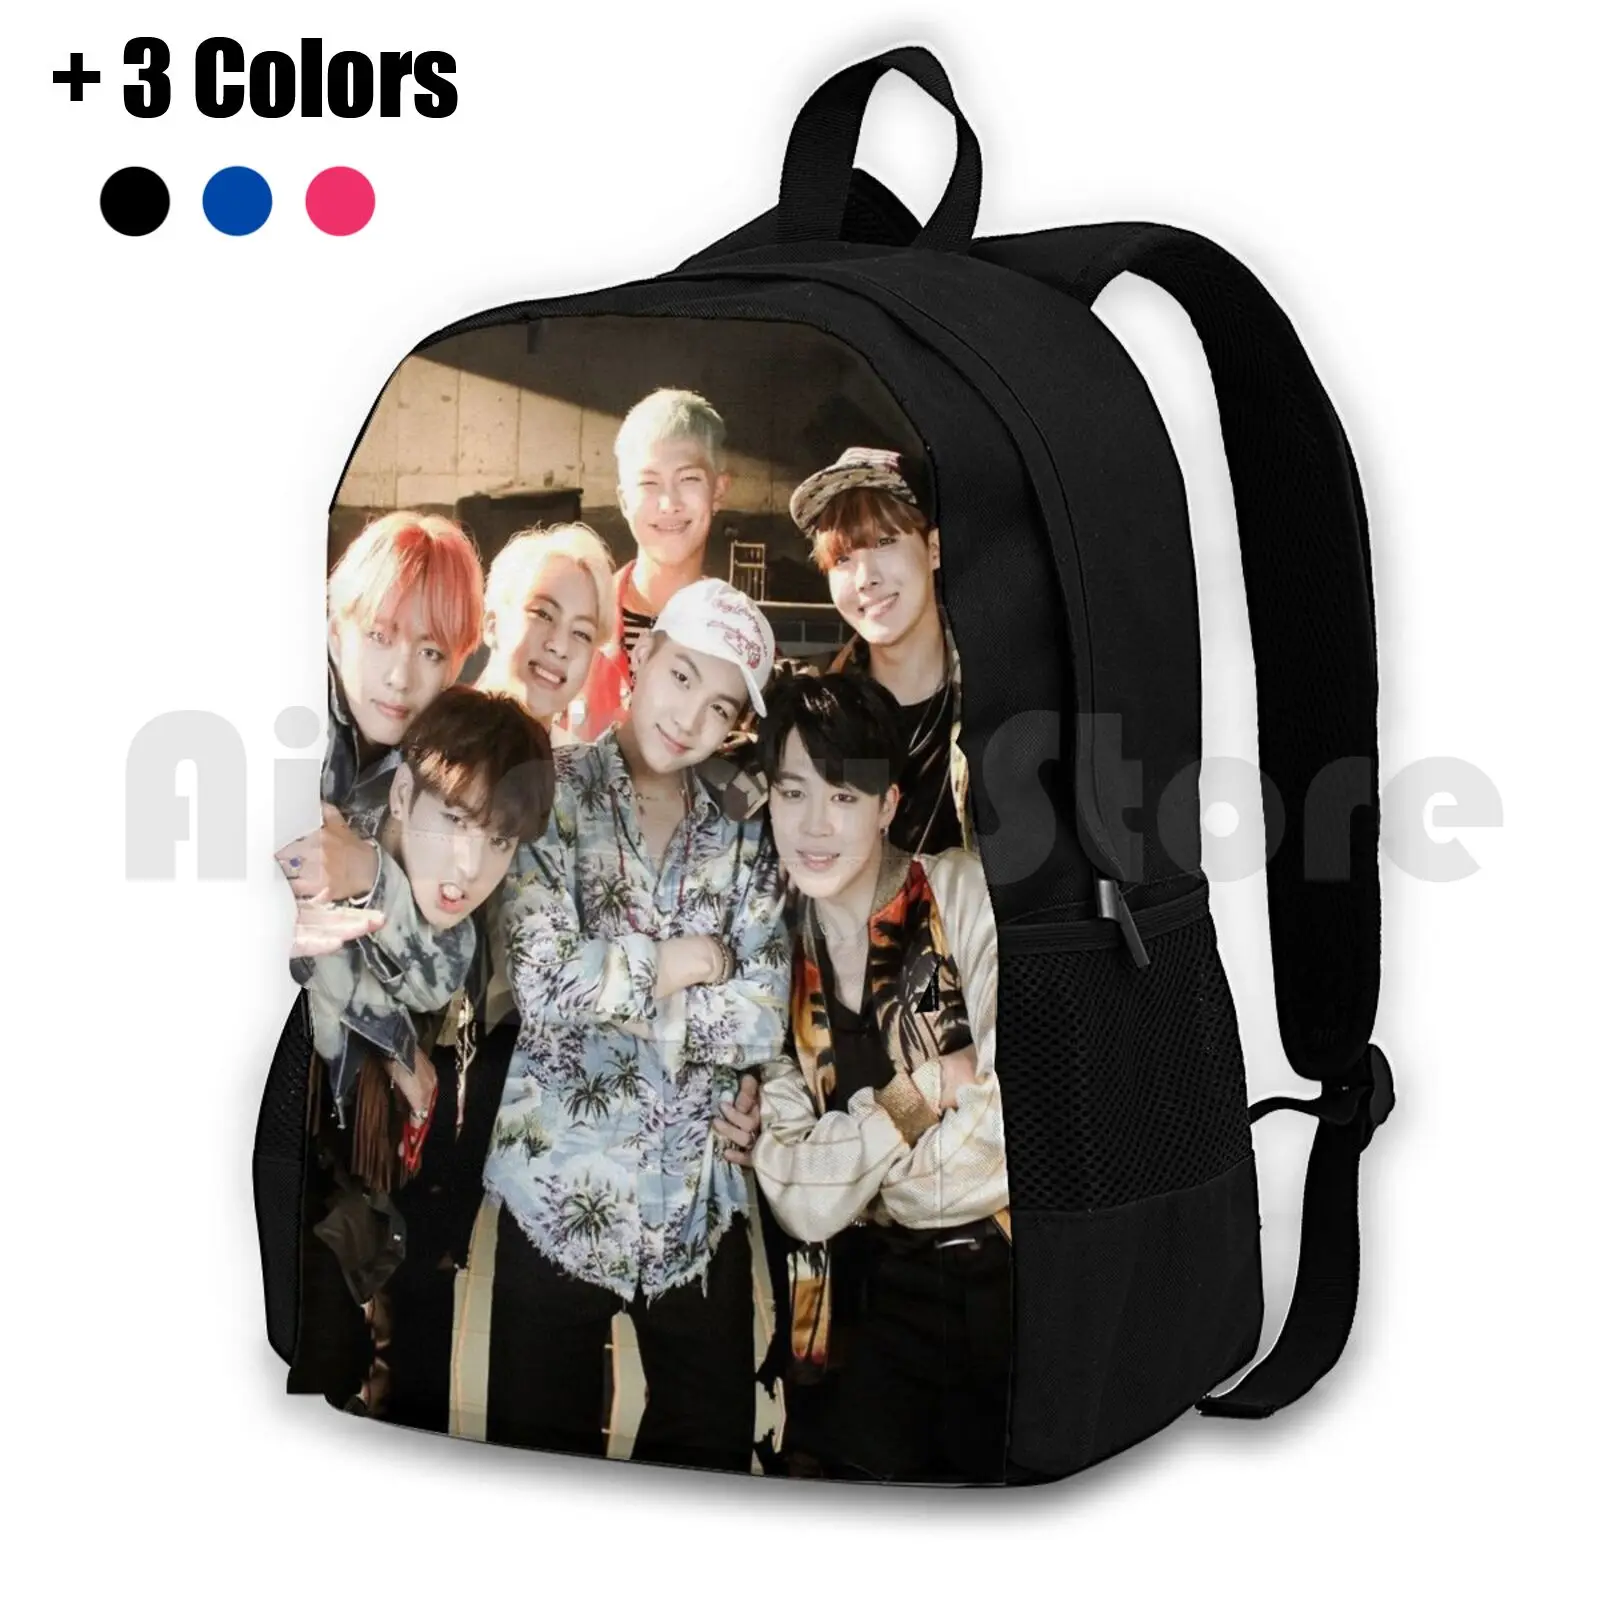 

/-Fire Group Photo Outdoor Hiking Backpack Riding Climbing Sports Bag Collage Pink White Kpop Korean Pop Tumblr Bulletproof Boy